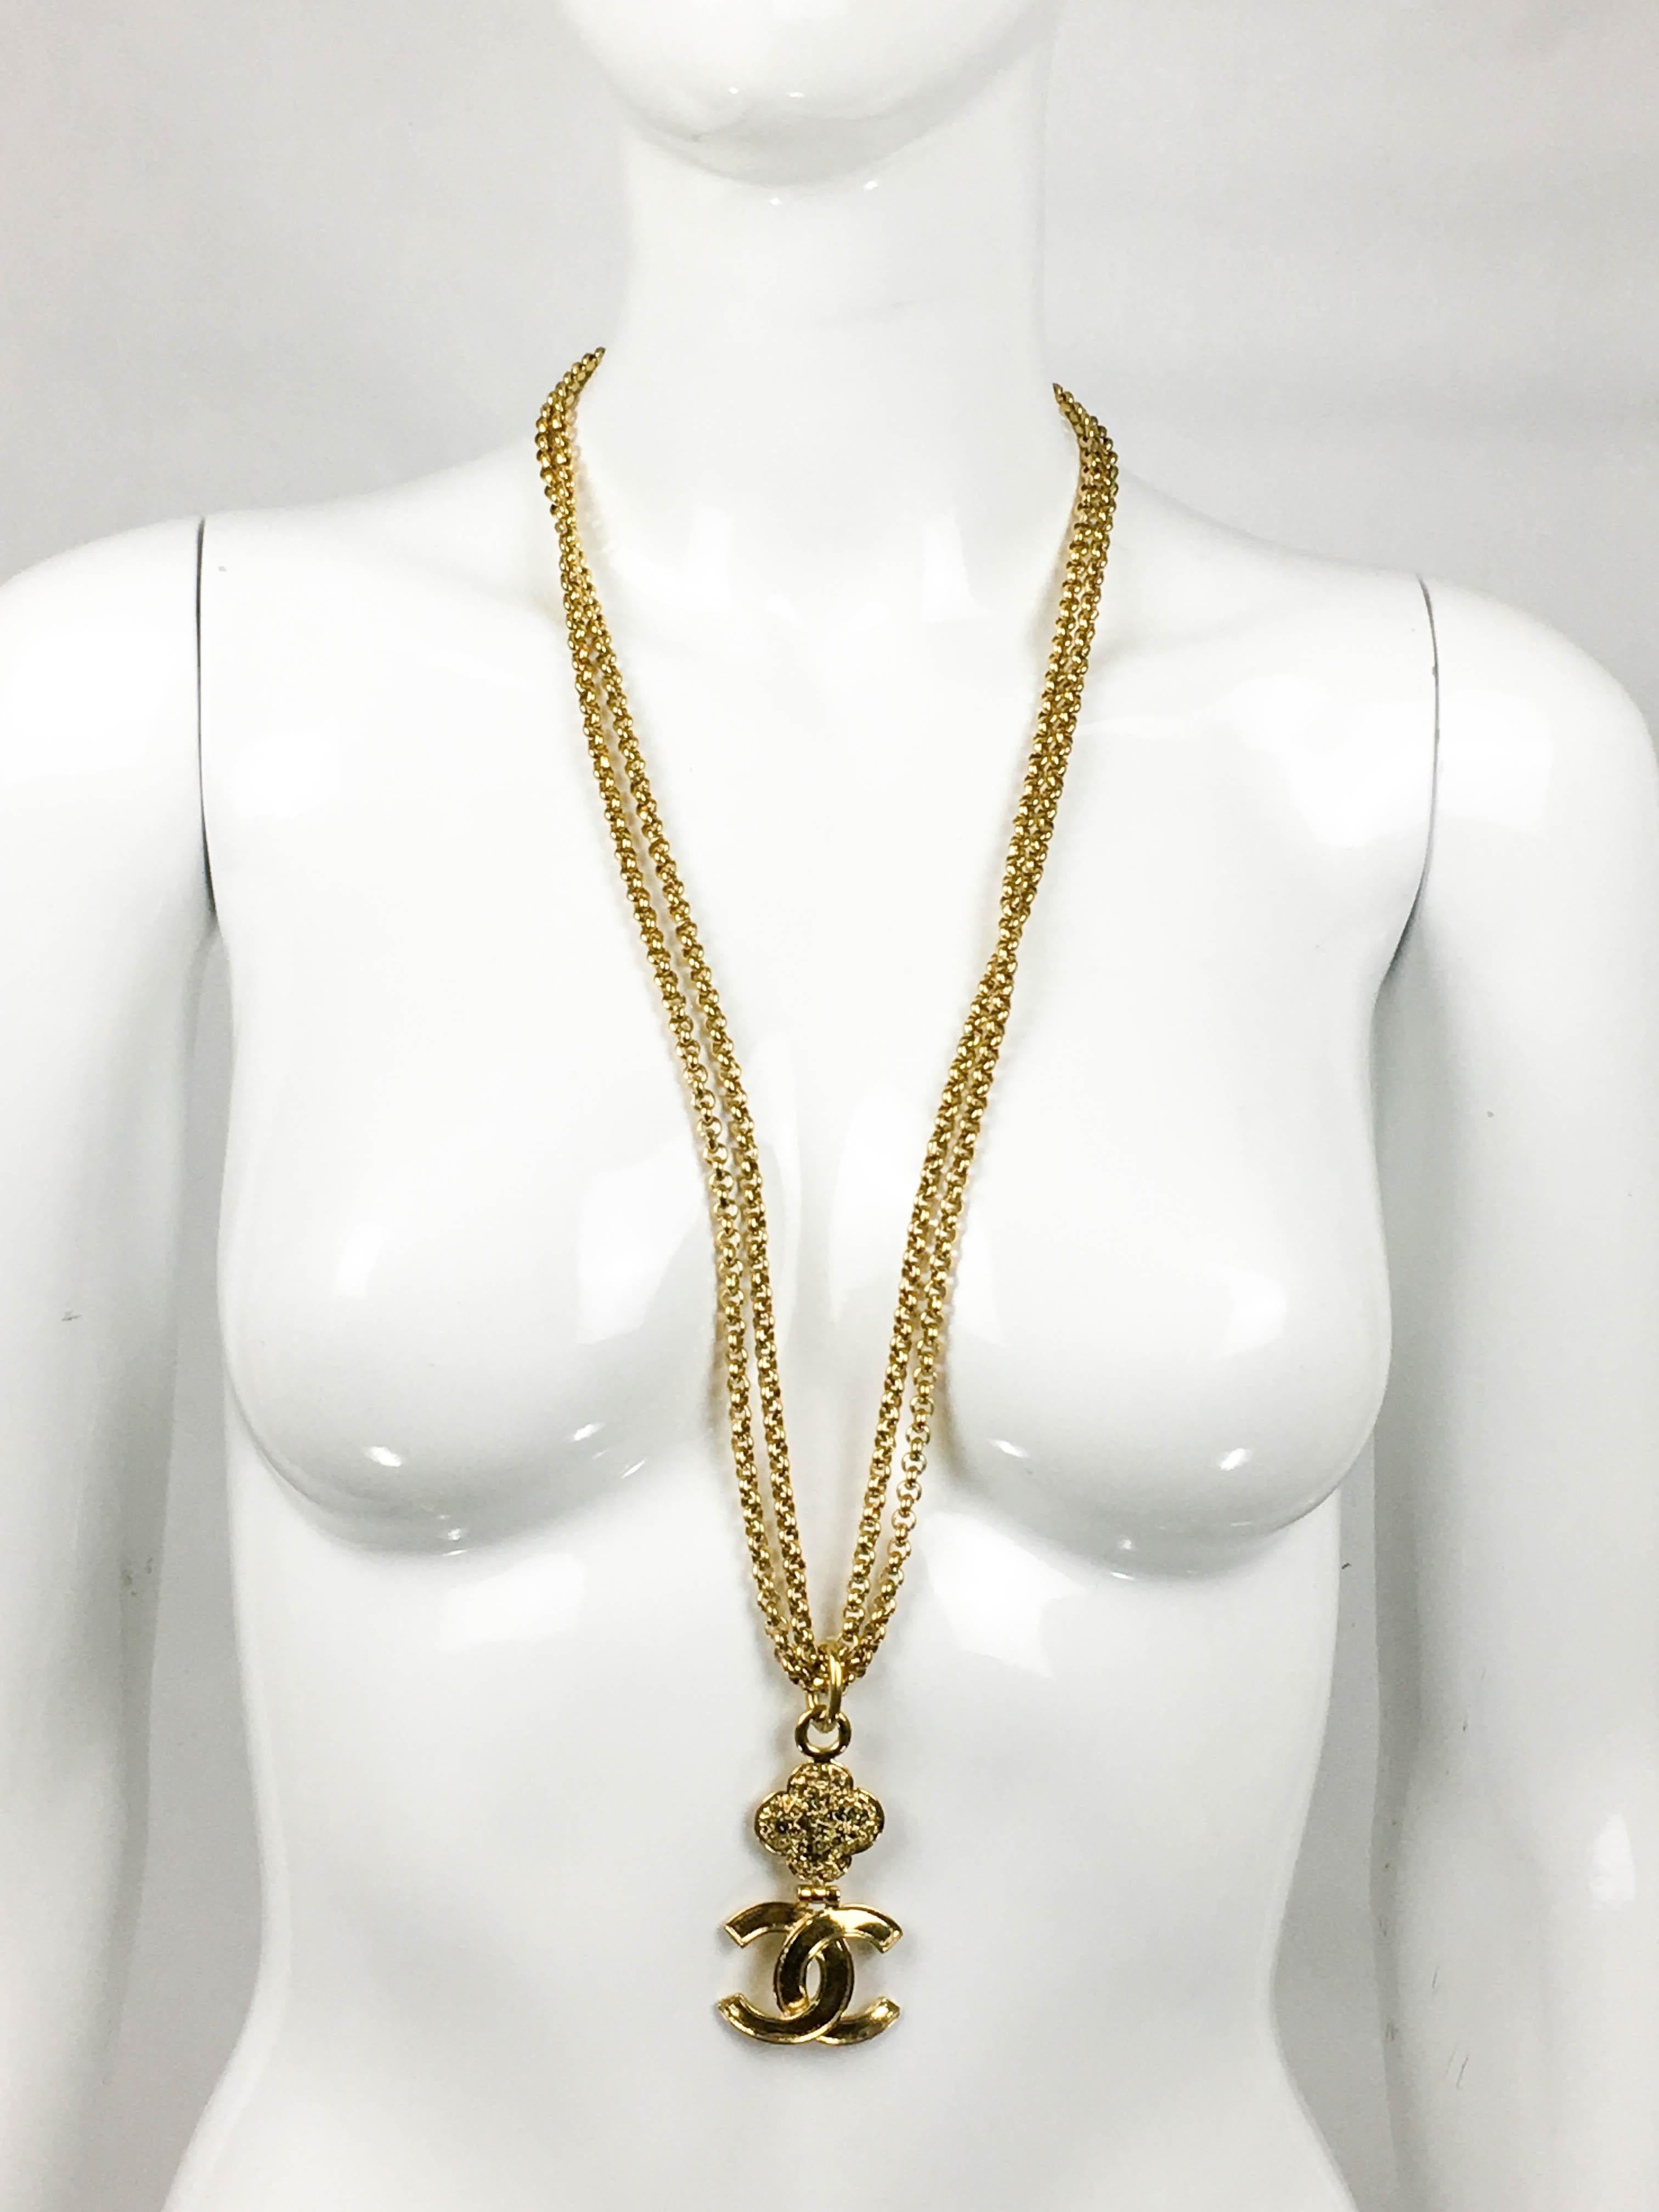 1995 Chanel Gilt Double-Chain Logo Pendant Necklace In Excellent Condition In London, Chelsea